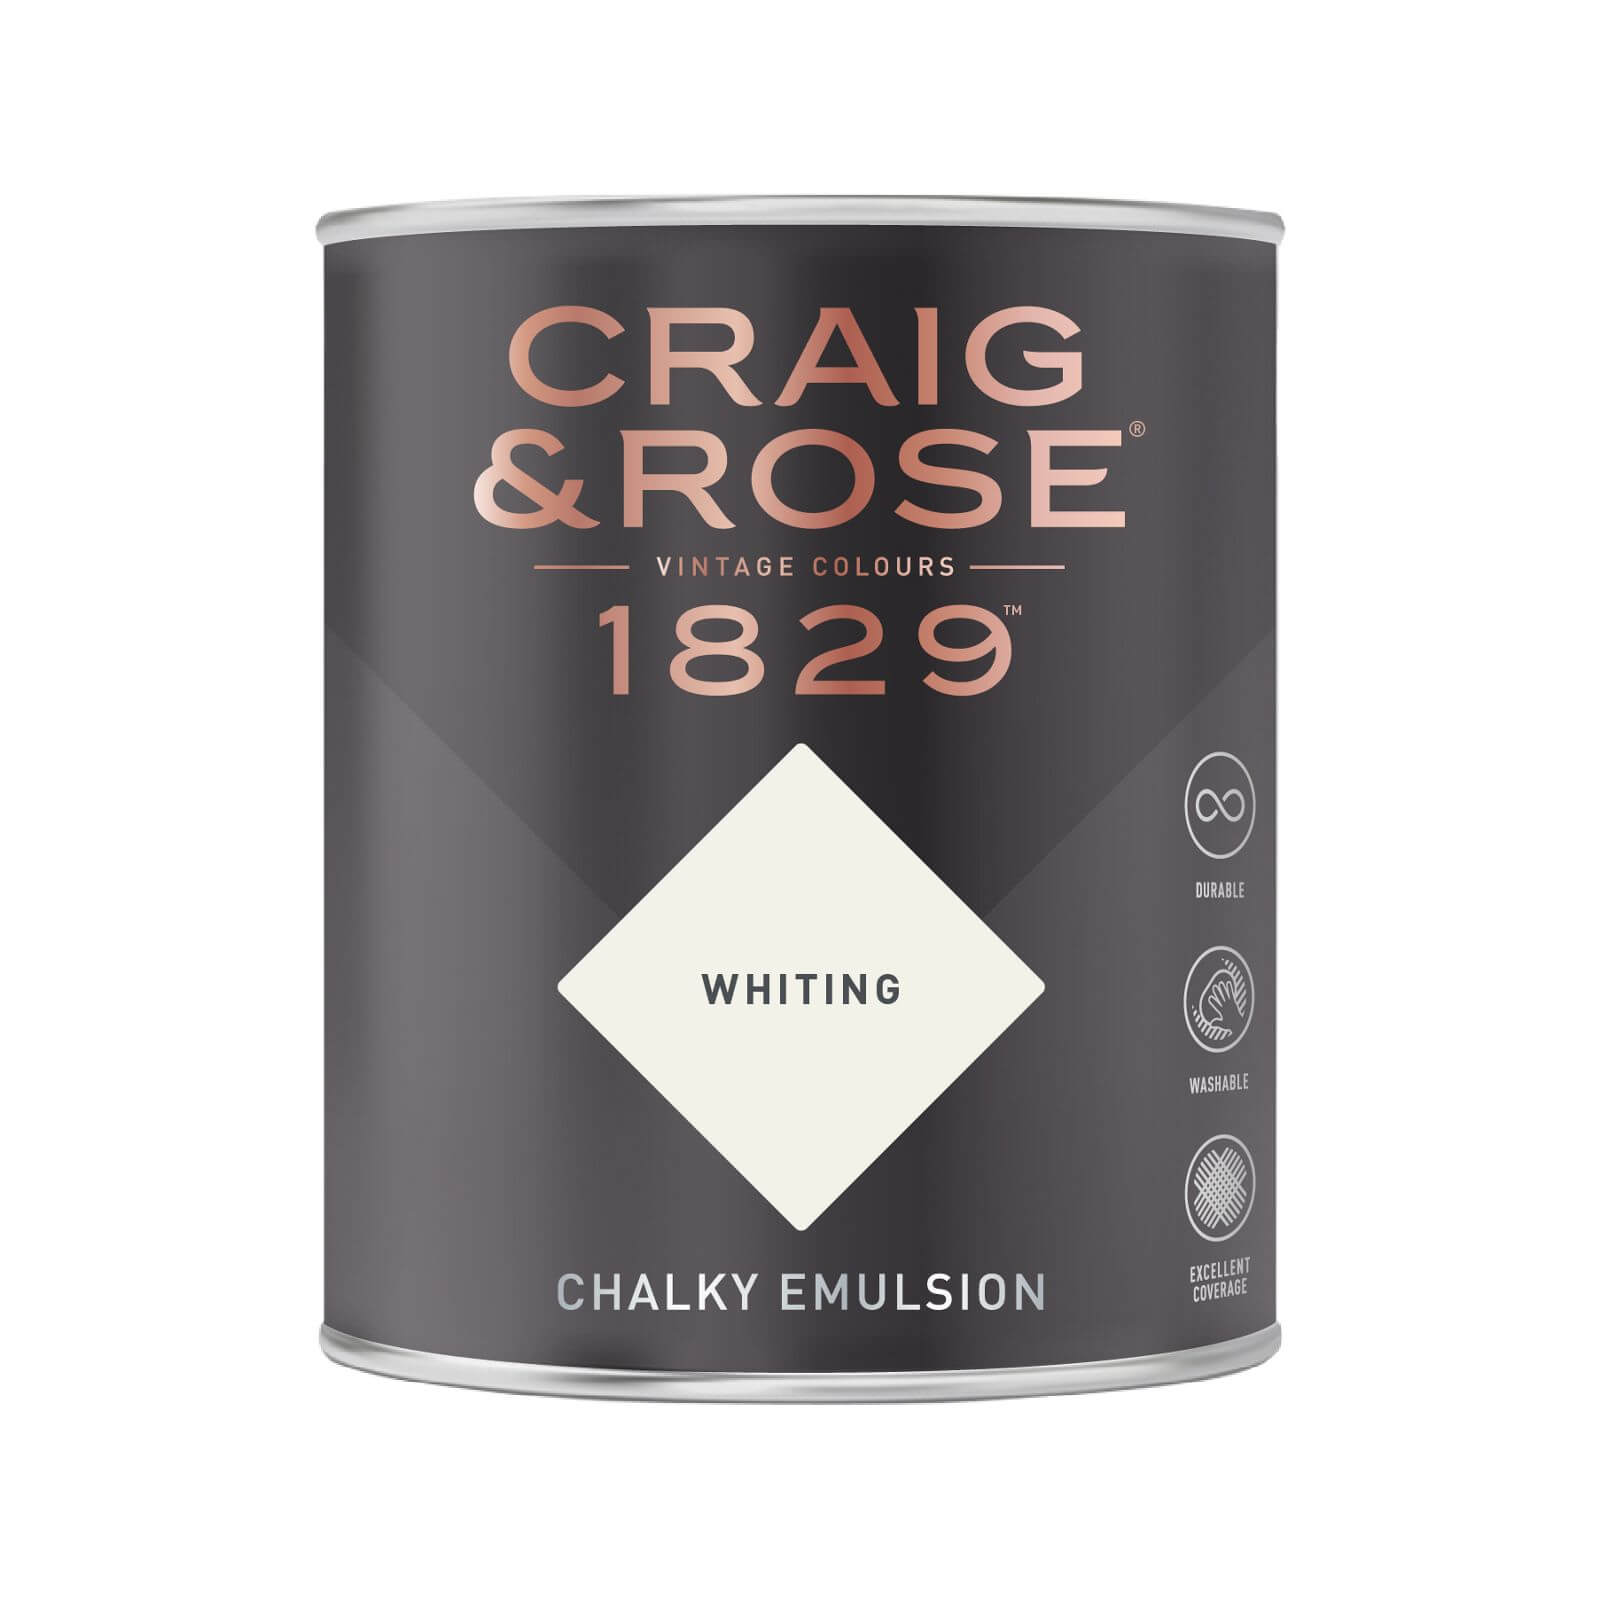 Craig & Rose 1829 Chalky Emulsion Paint Whiting - 750ml